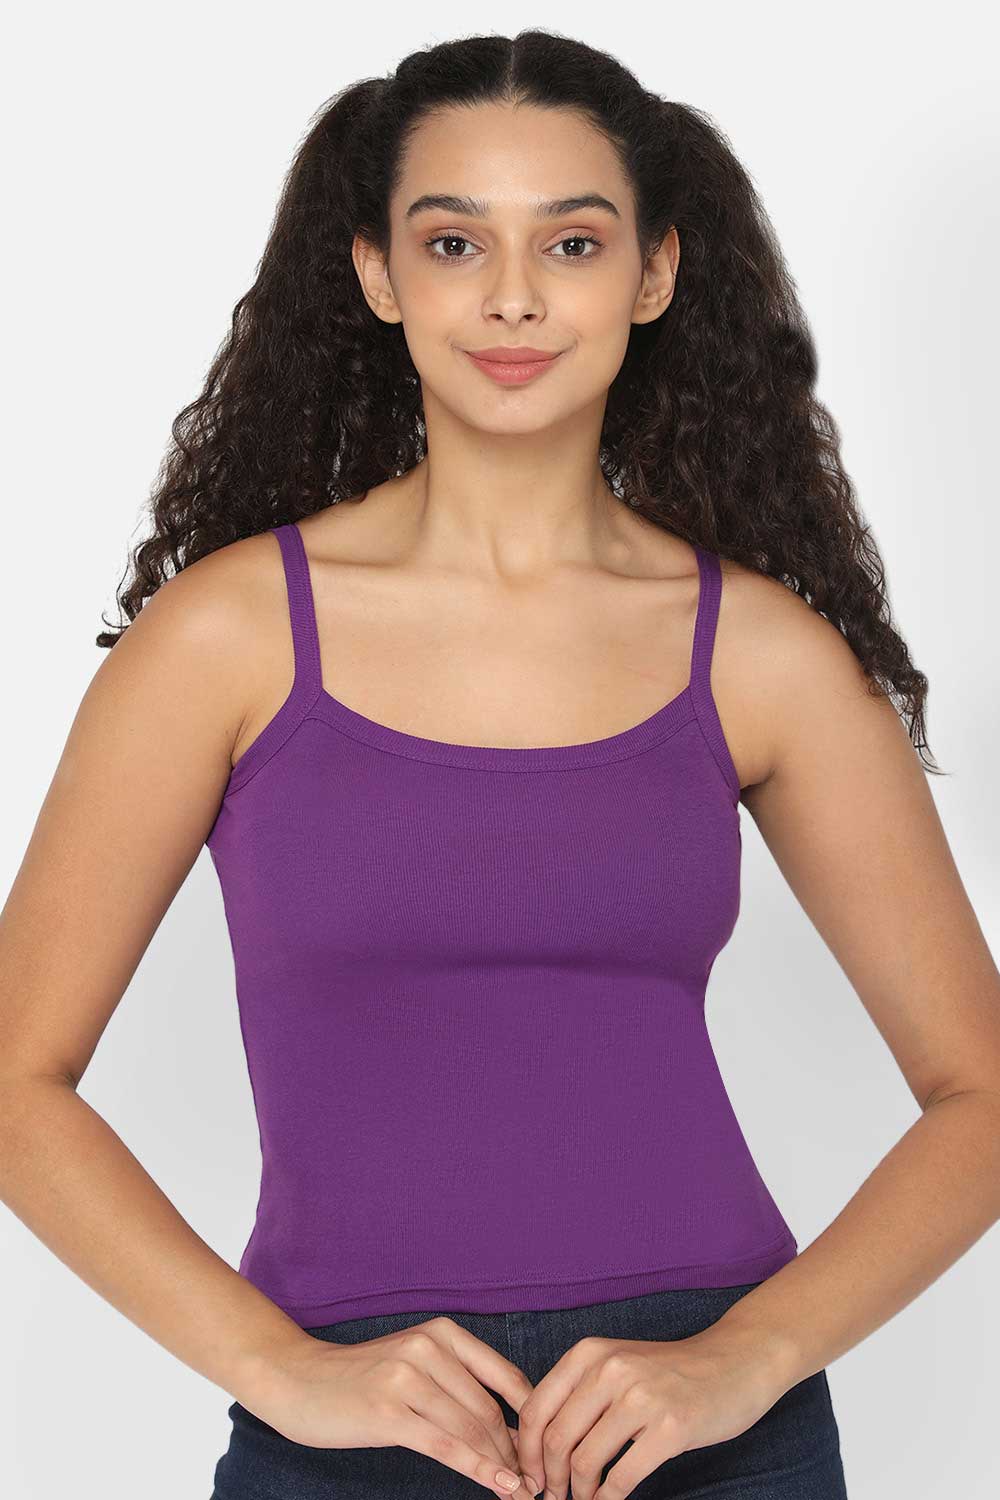 Intimacy Camisole-Slip Special Combo Pack - In01 - Pack of 3 - C42